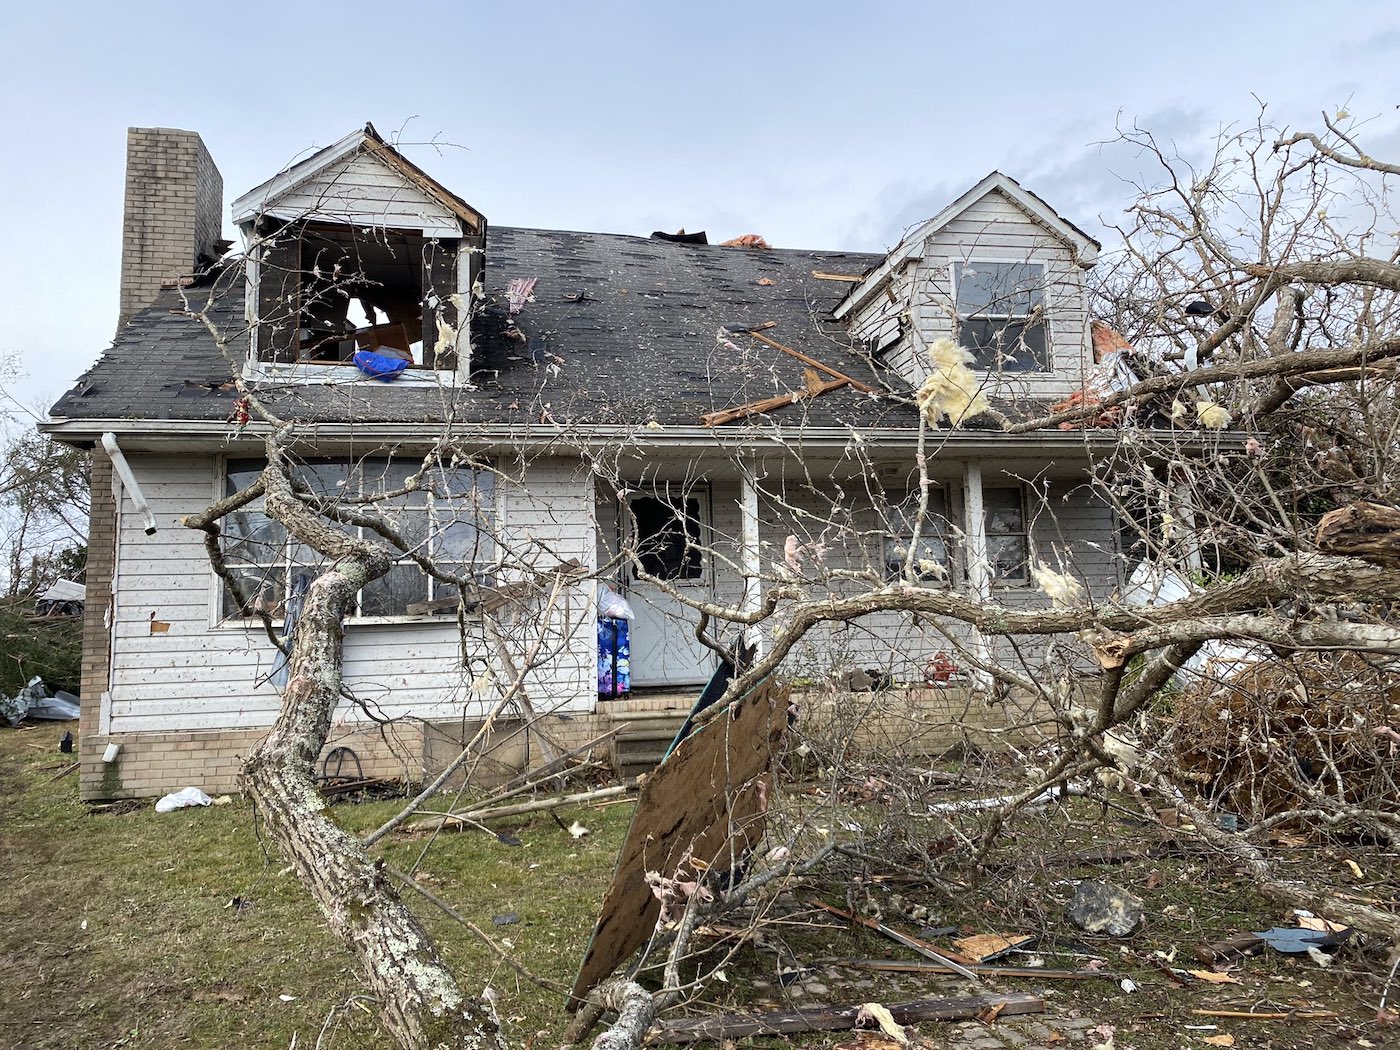 Tornado season is underway, but it's difficult to predict how many